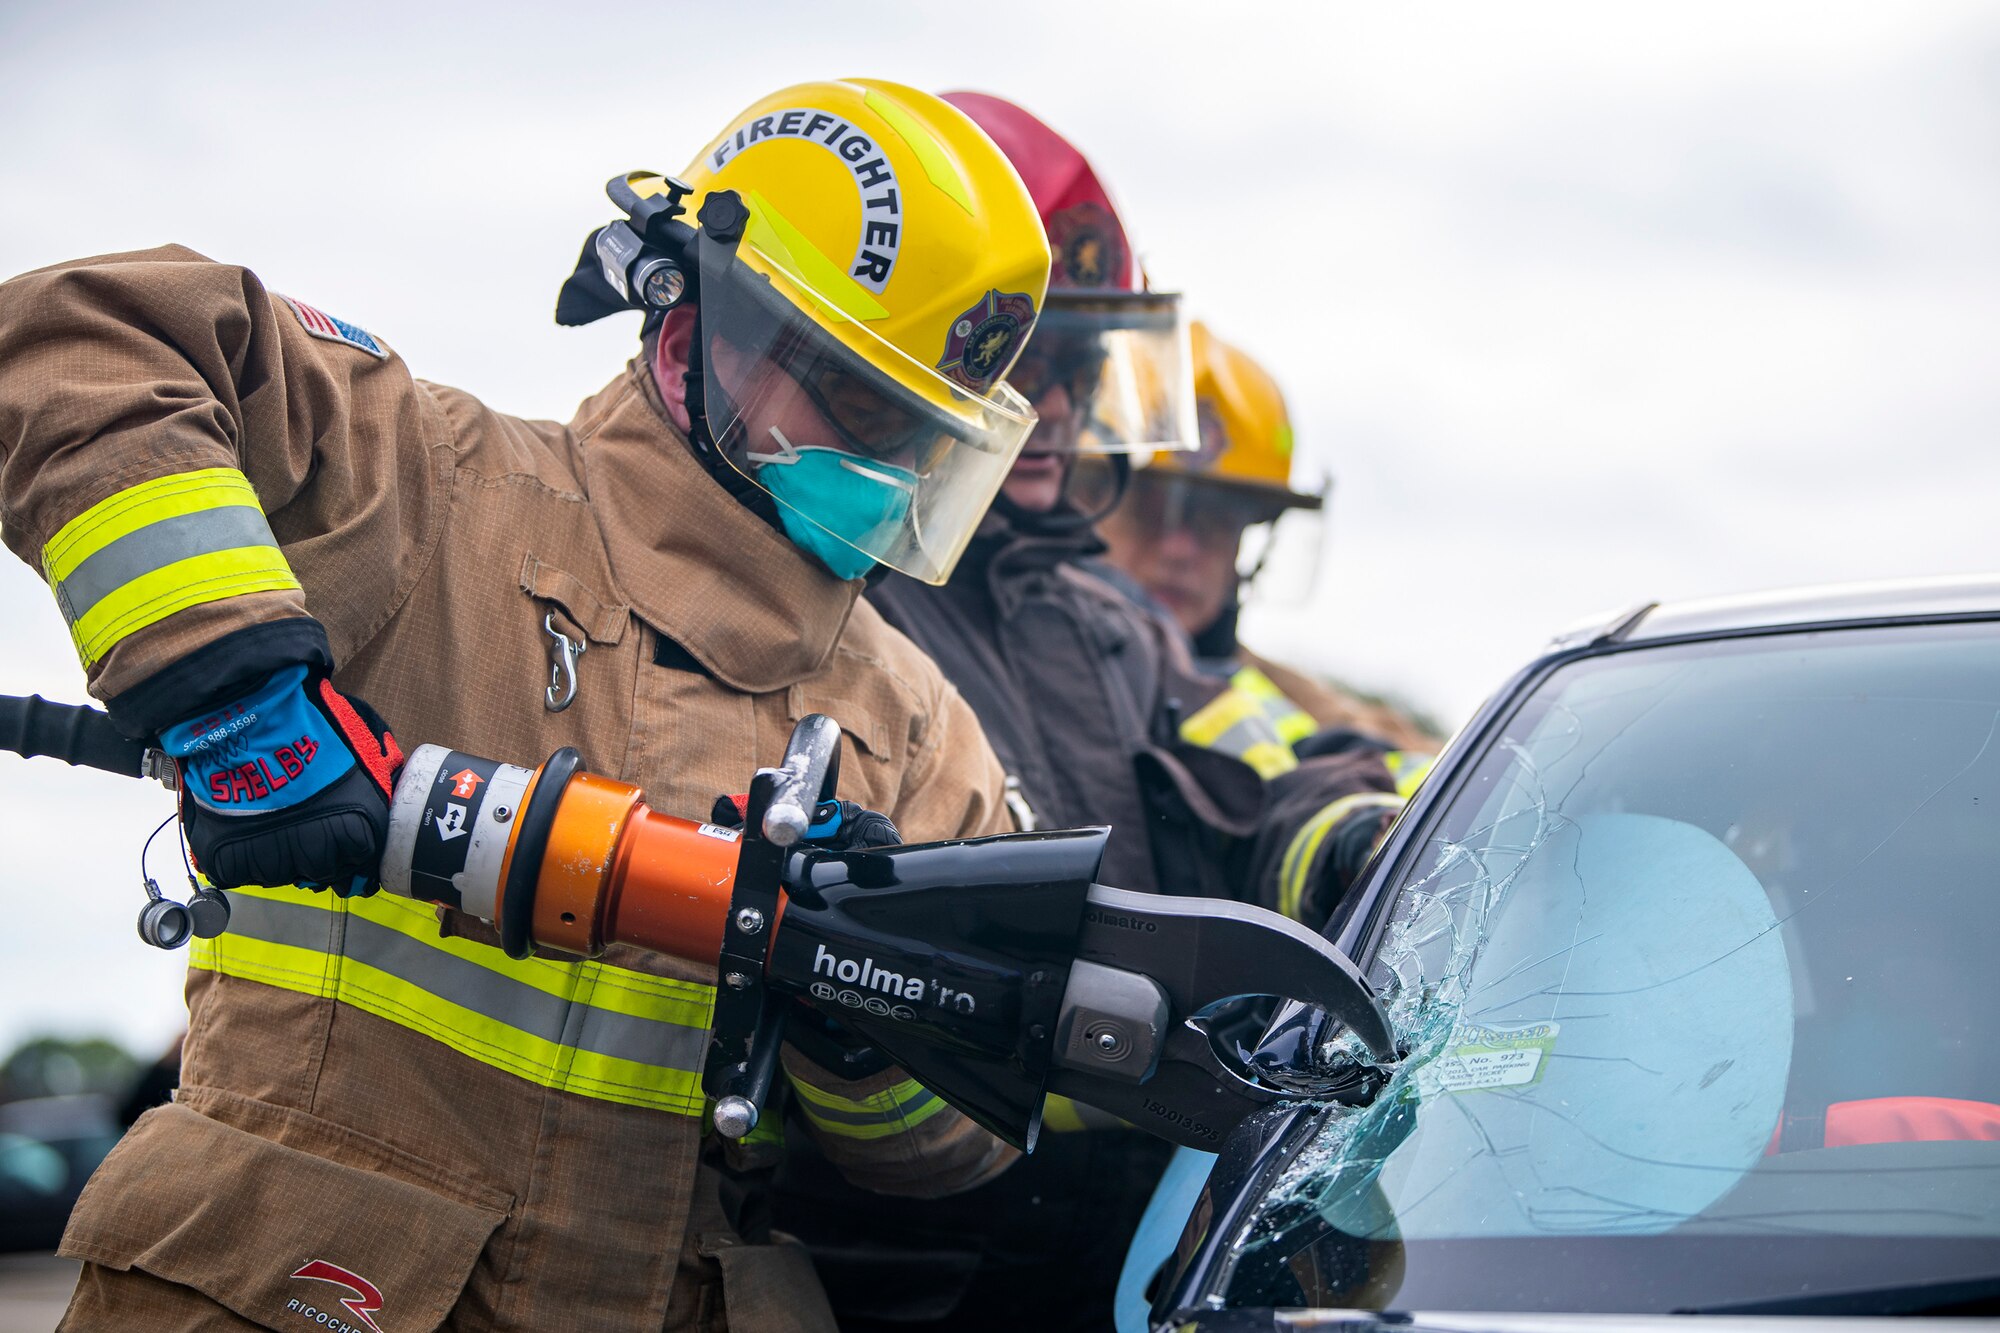 A firefighter from the 423d Civil Engineer Squadron, uses shears to dismantle a vehicle during a rescue demonstration at RAF Alconbury, England, Oct. 12, 2022. The demonstration was part of Fire Prevention Week in which firefighters from the 423d CES educated Airmen and dependents on proper fire safety habits. (U.S. Air Force photo by Staff Sgt. Eugene Oliver)